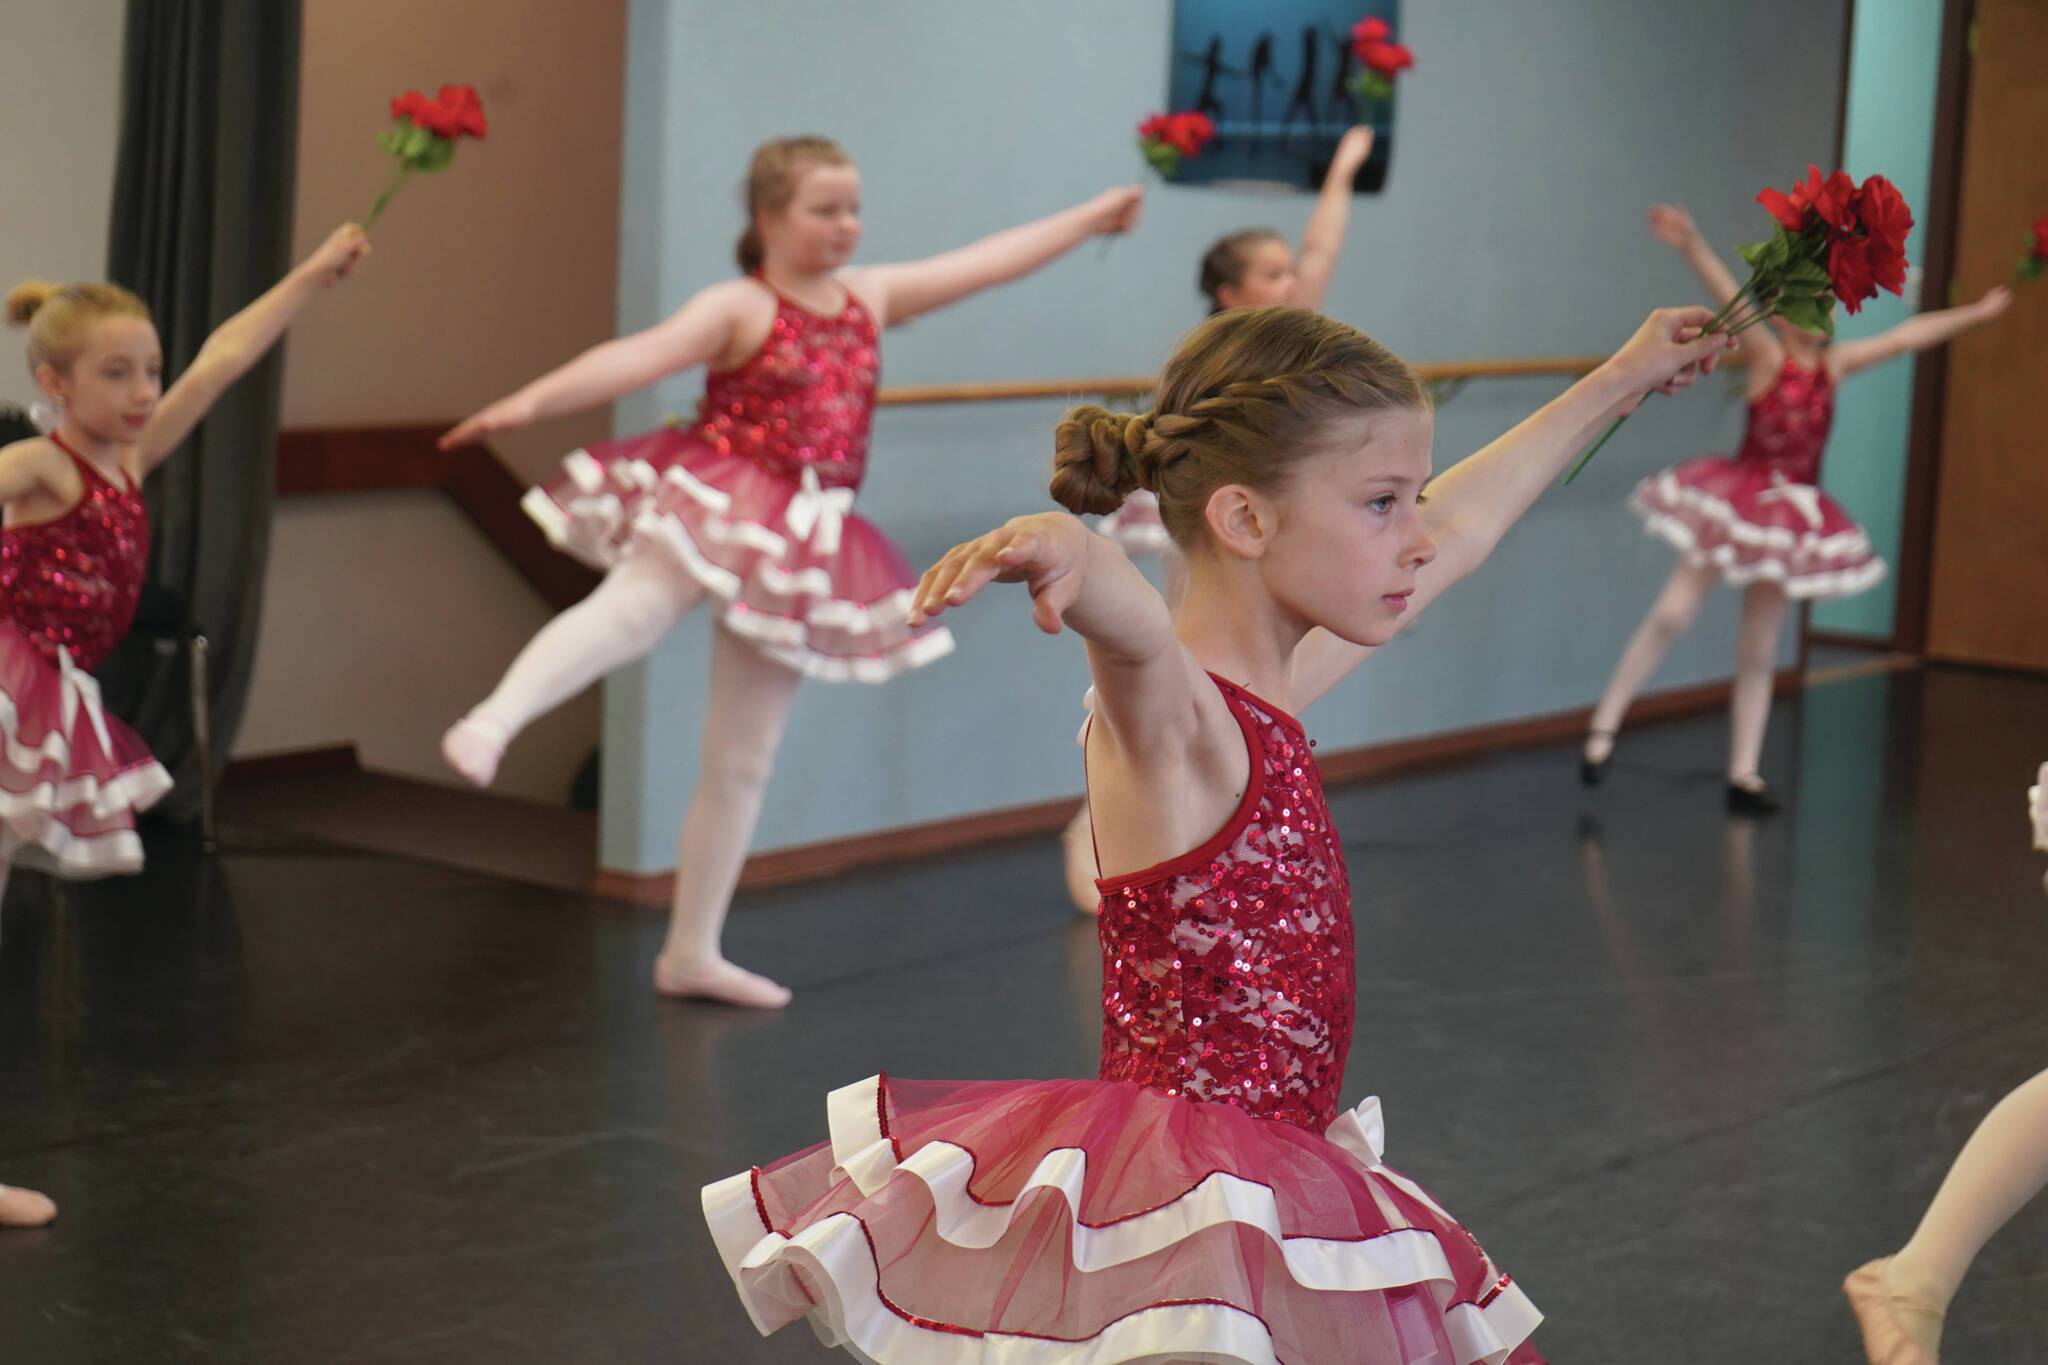 Encore Dance Academy students practice ahead of the 2023 Spring Recital at Encore Dance Academy on Tuesday. (Jake Dye/Peninsula Clarion)